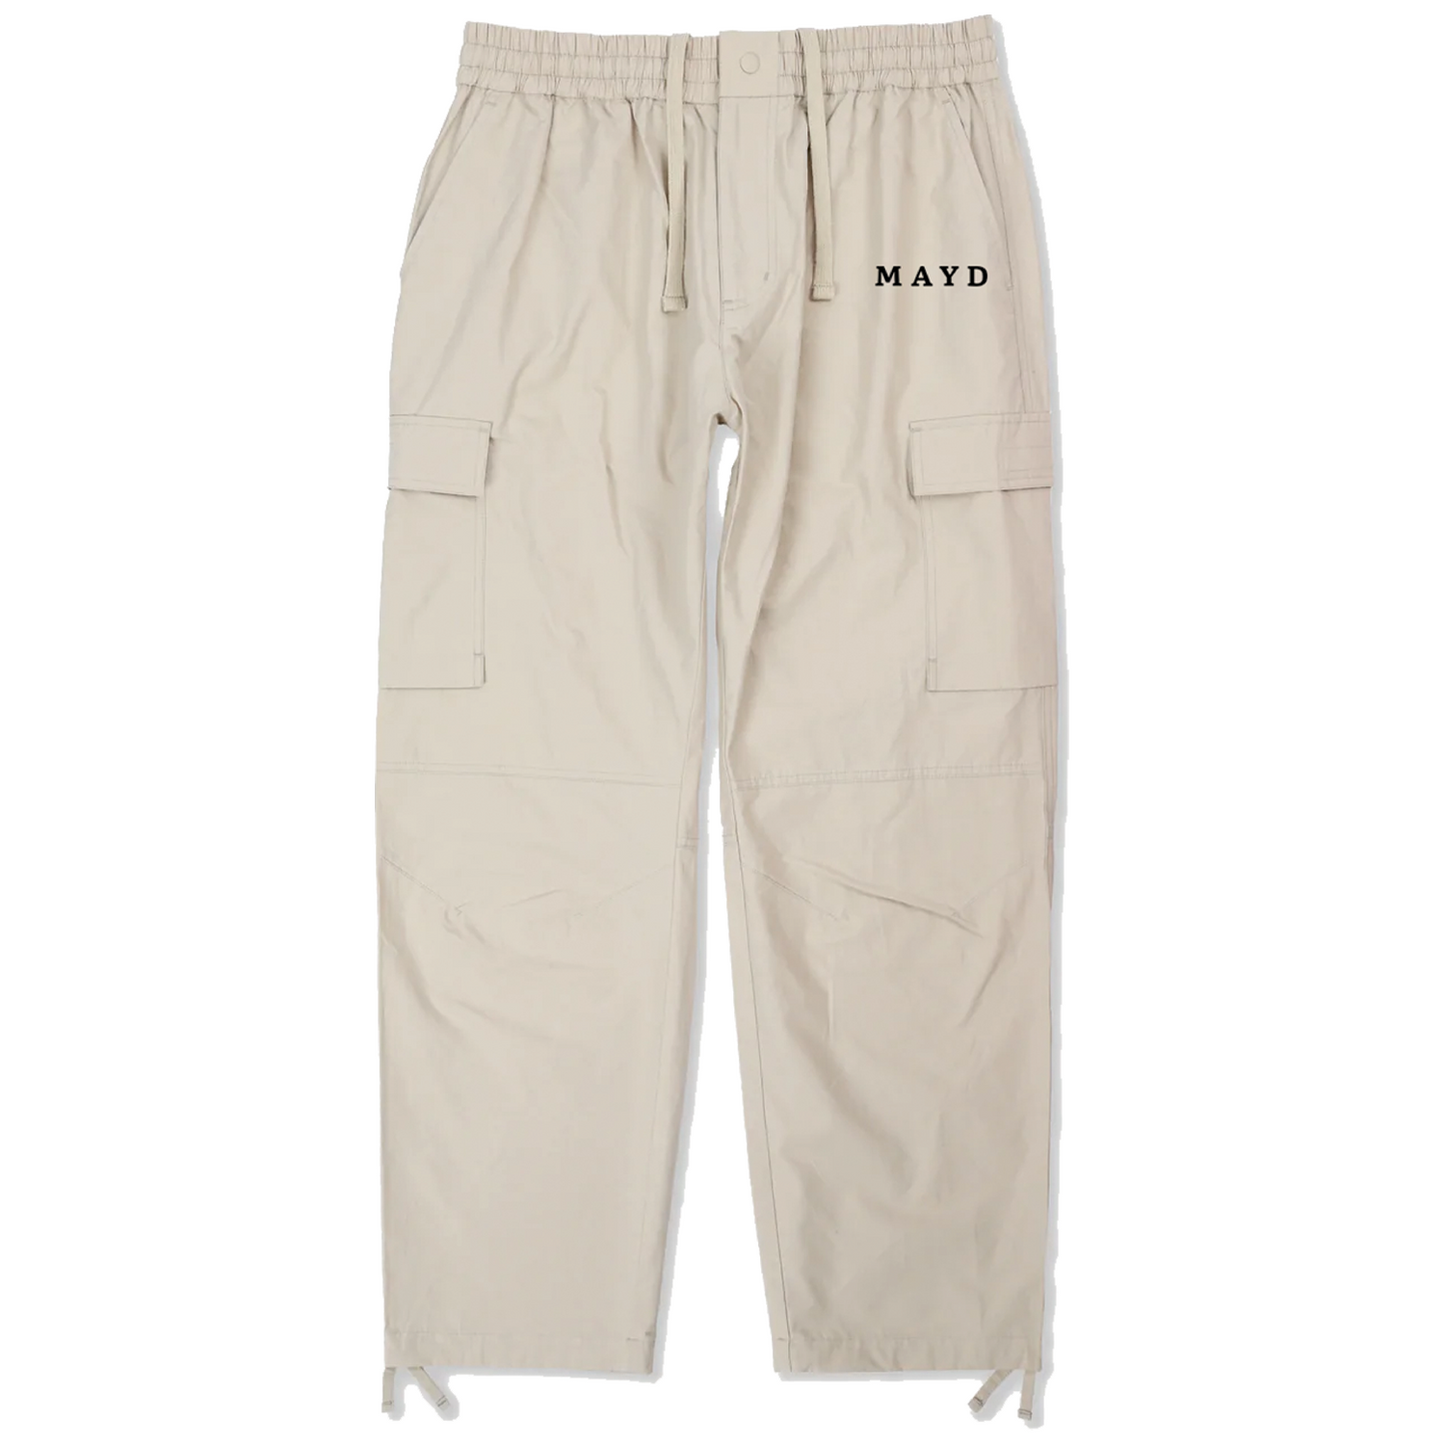 MAYD in America Cargo Pants